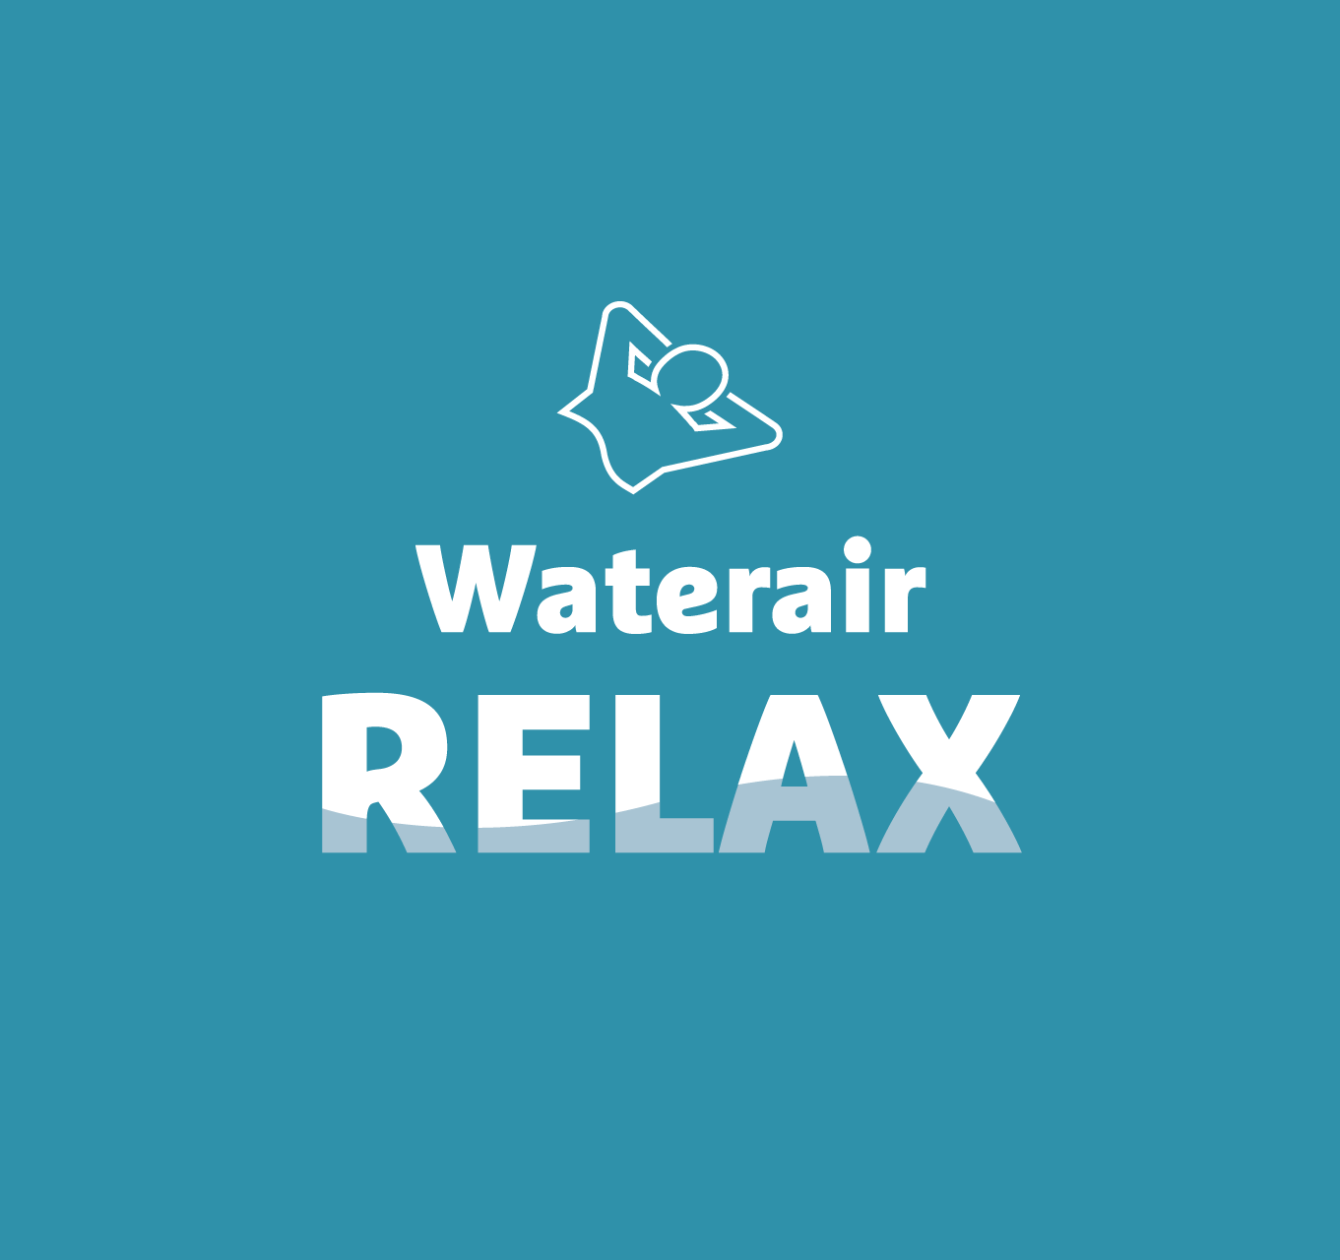 Waterair Relax: your easy-to-maintain pool